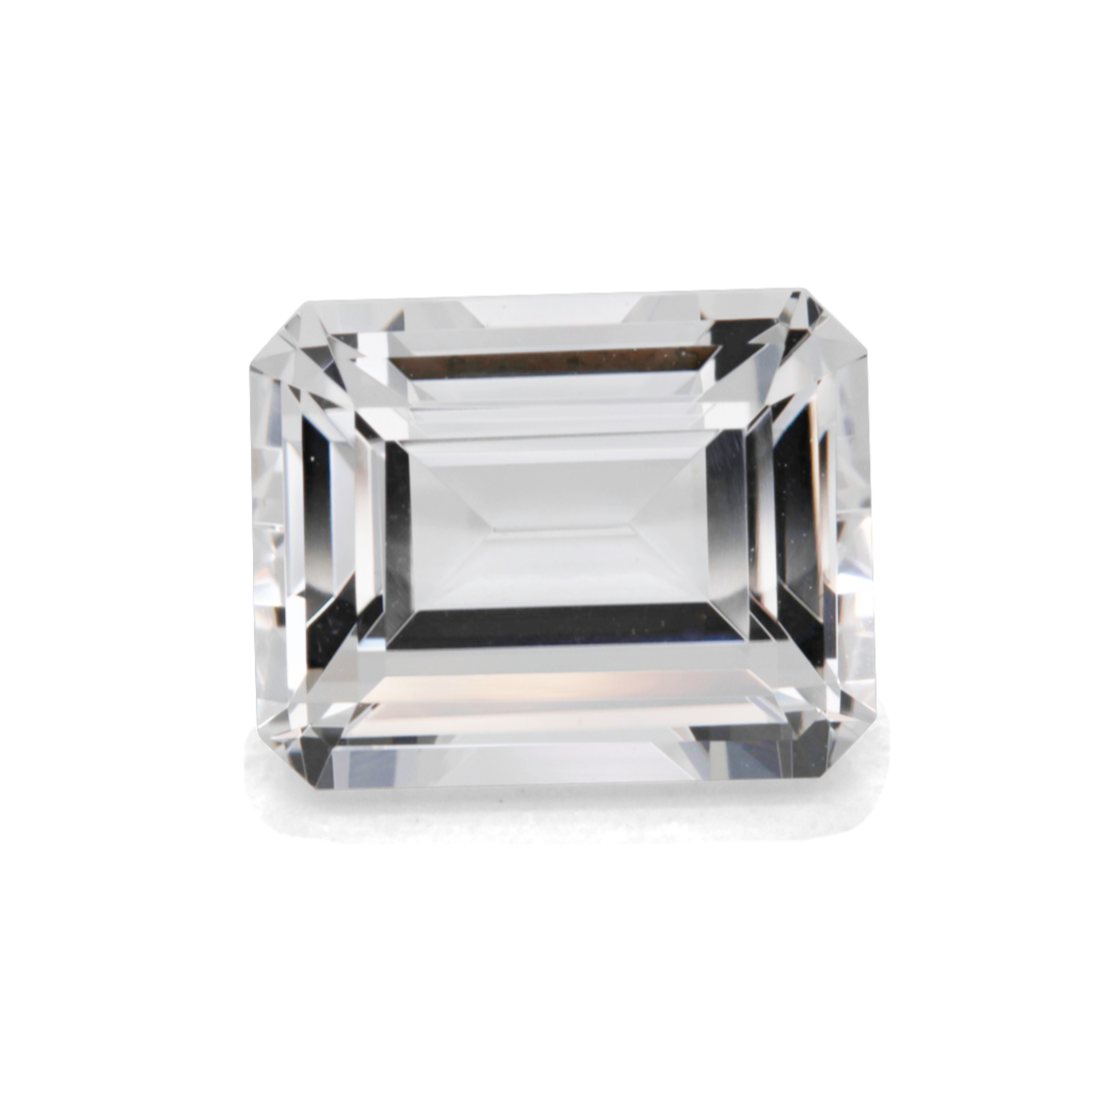 Beryl - white, octagon, 10x8 mm, 3.38 cts, No. BY90022